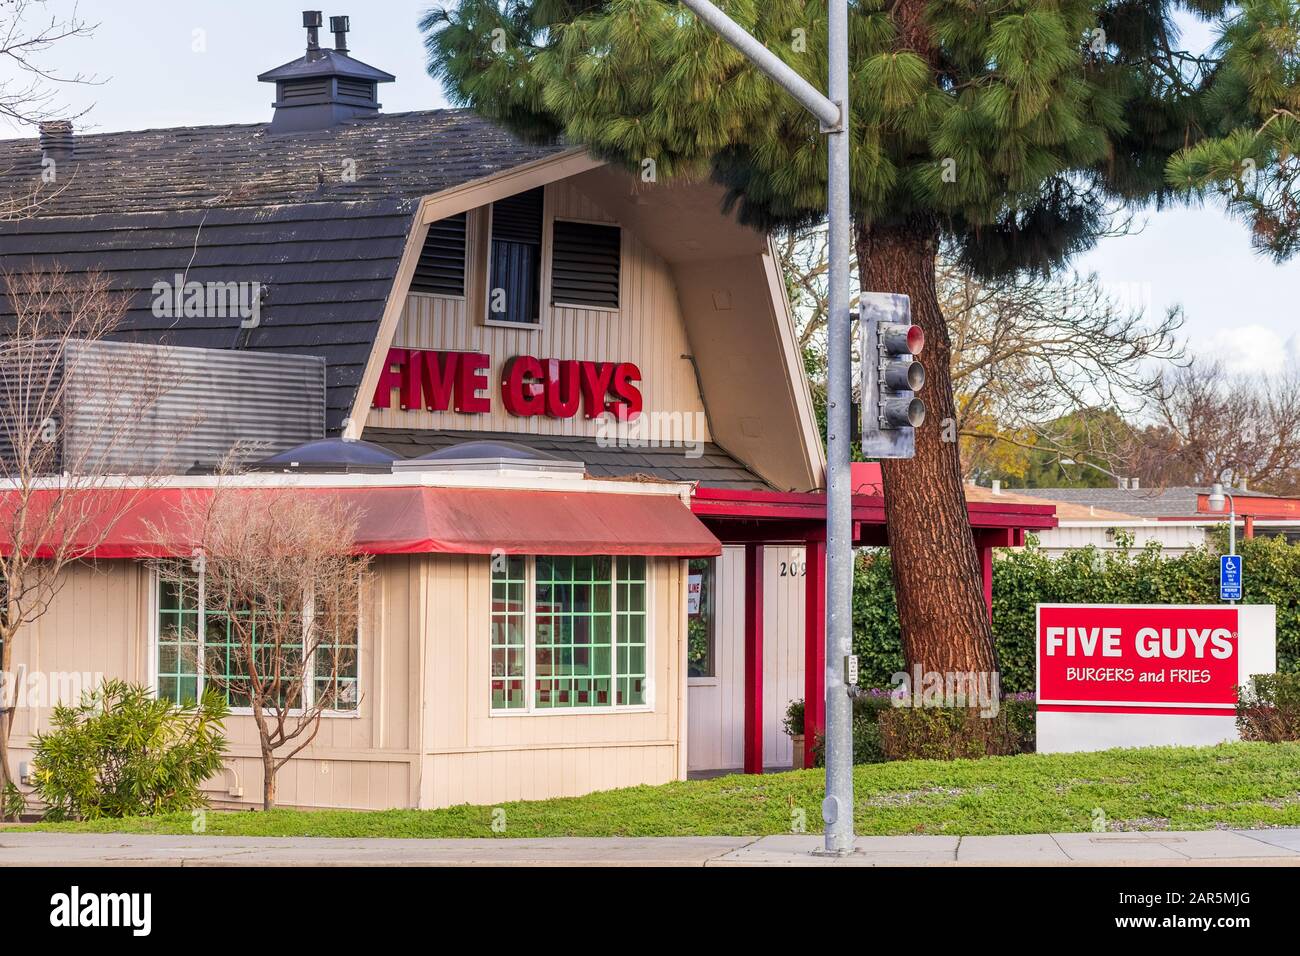 Jan 24, 2020 Mountain View / CA / USA - Five Guys Burgers and Fries fast food location in San Francisco Bay Area; Five Guys Enterprises LLC is an Amer Stock Photo